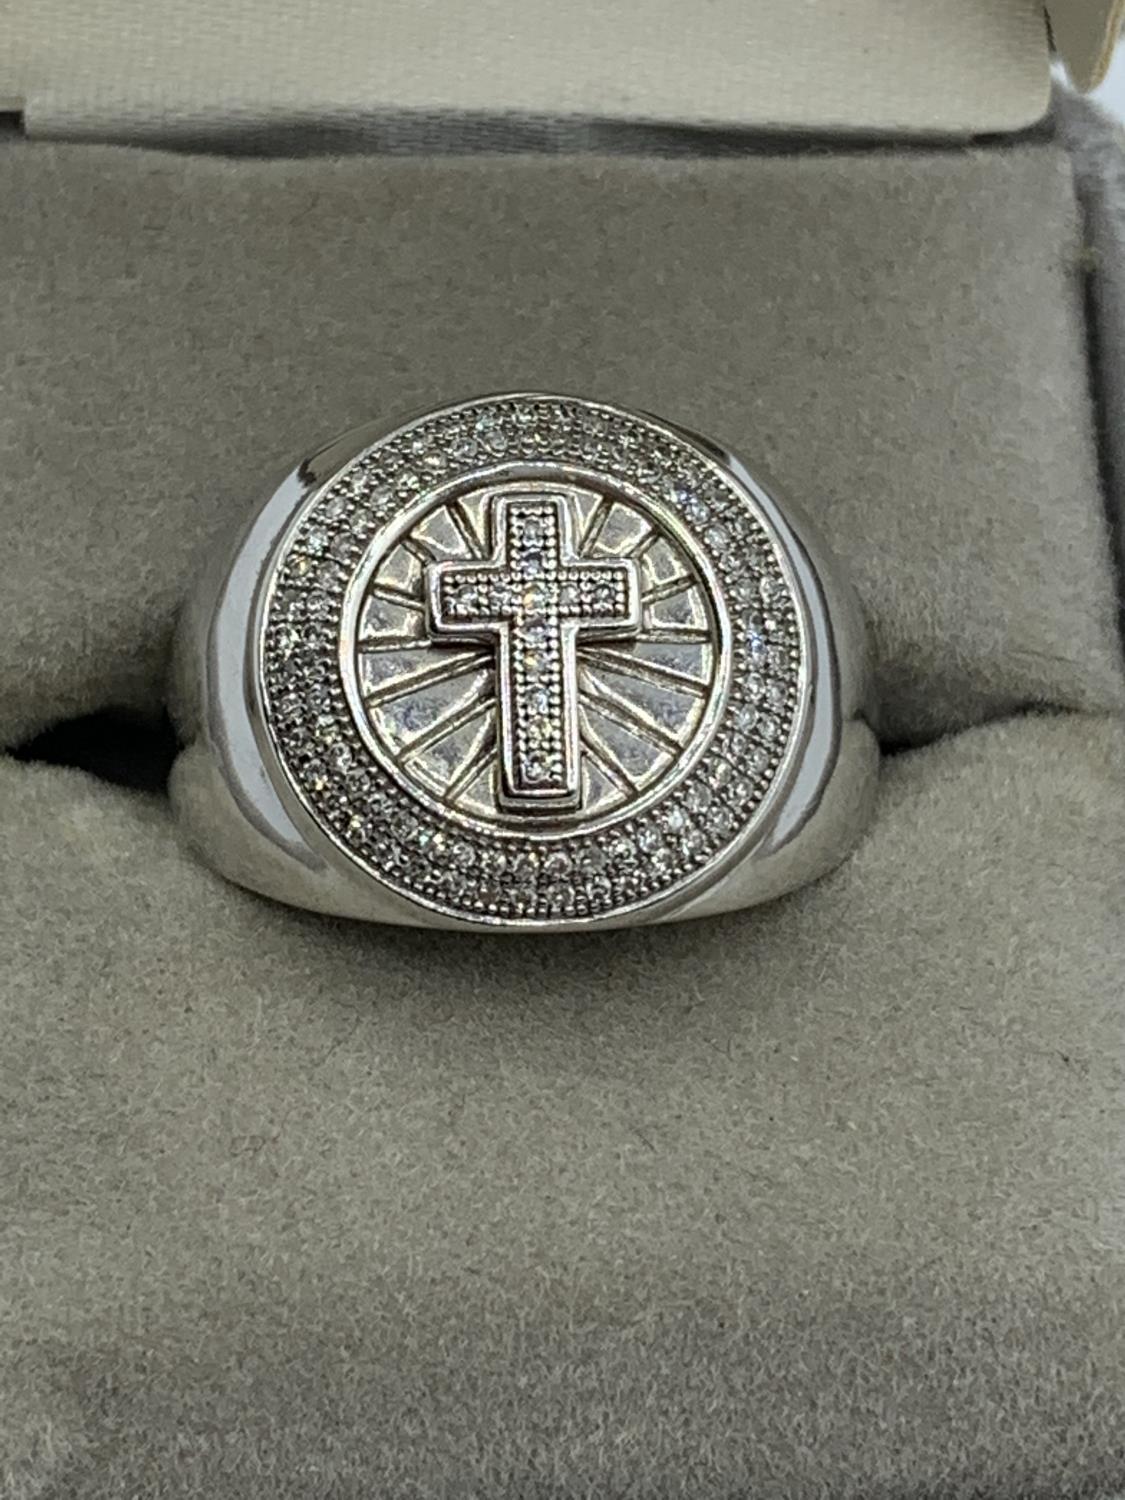 9ct white gold ring with encrusted diamonds forming a cross in the centre and more diamonds surround - Image 4 of 4